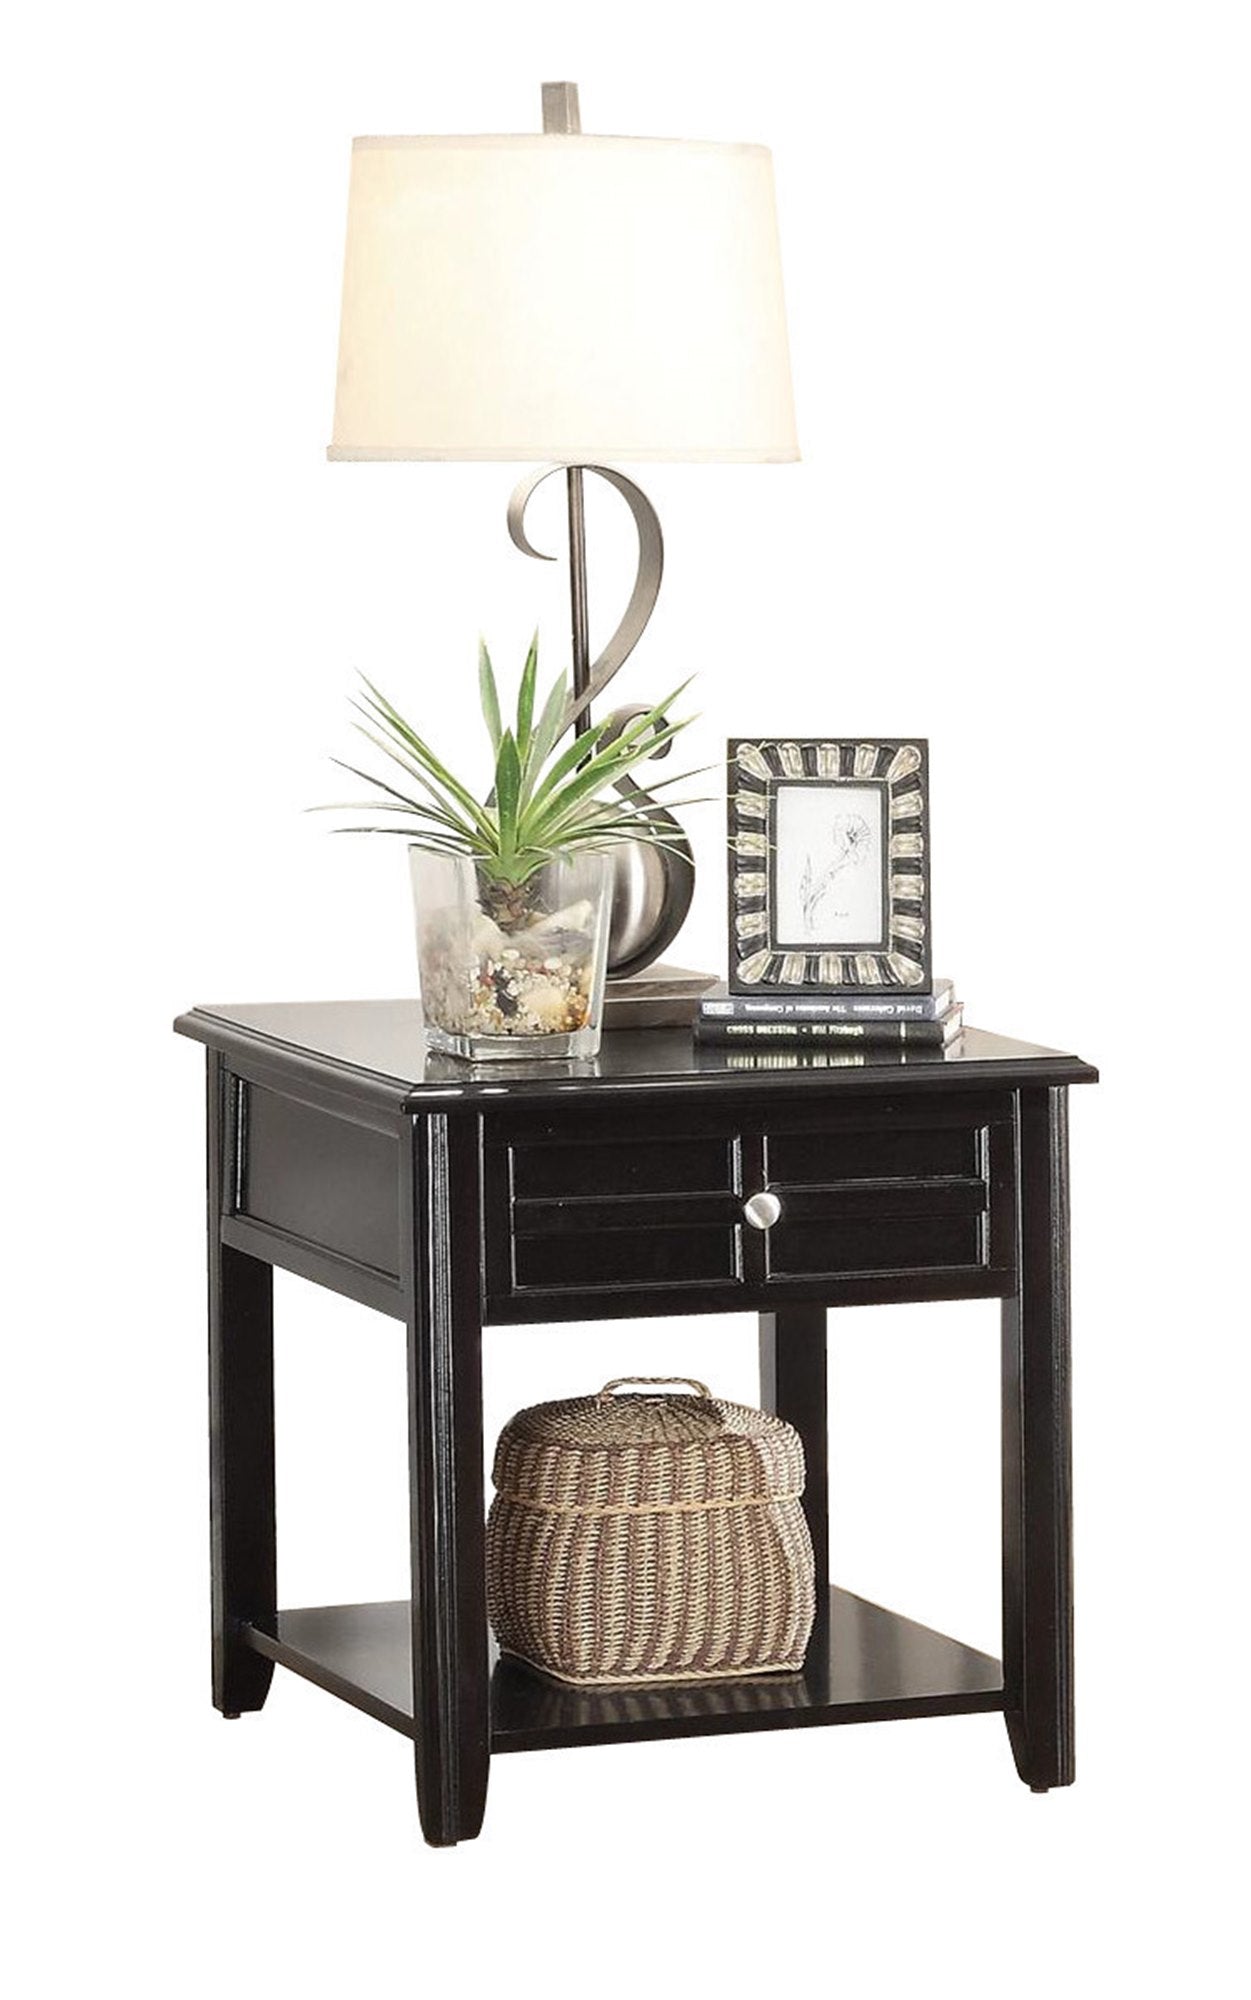 Homelegance Carrier 2PC Occasional Set Lift Top Cocktail Table on Casters, 1 End Table in Dark Espresso